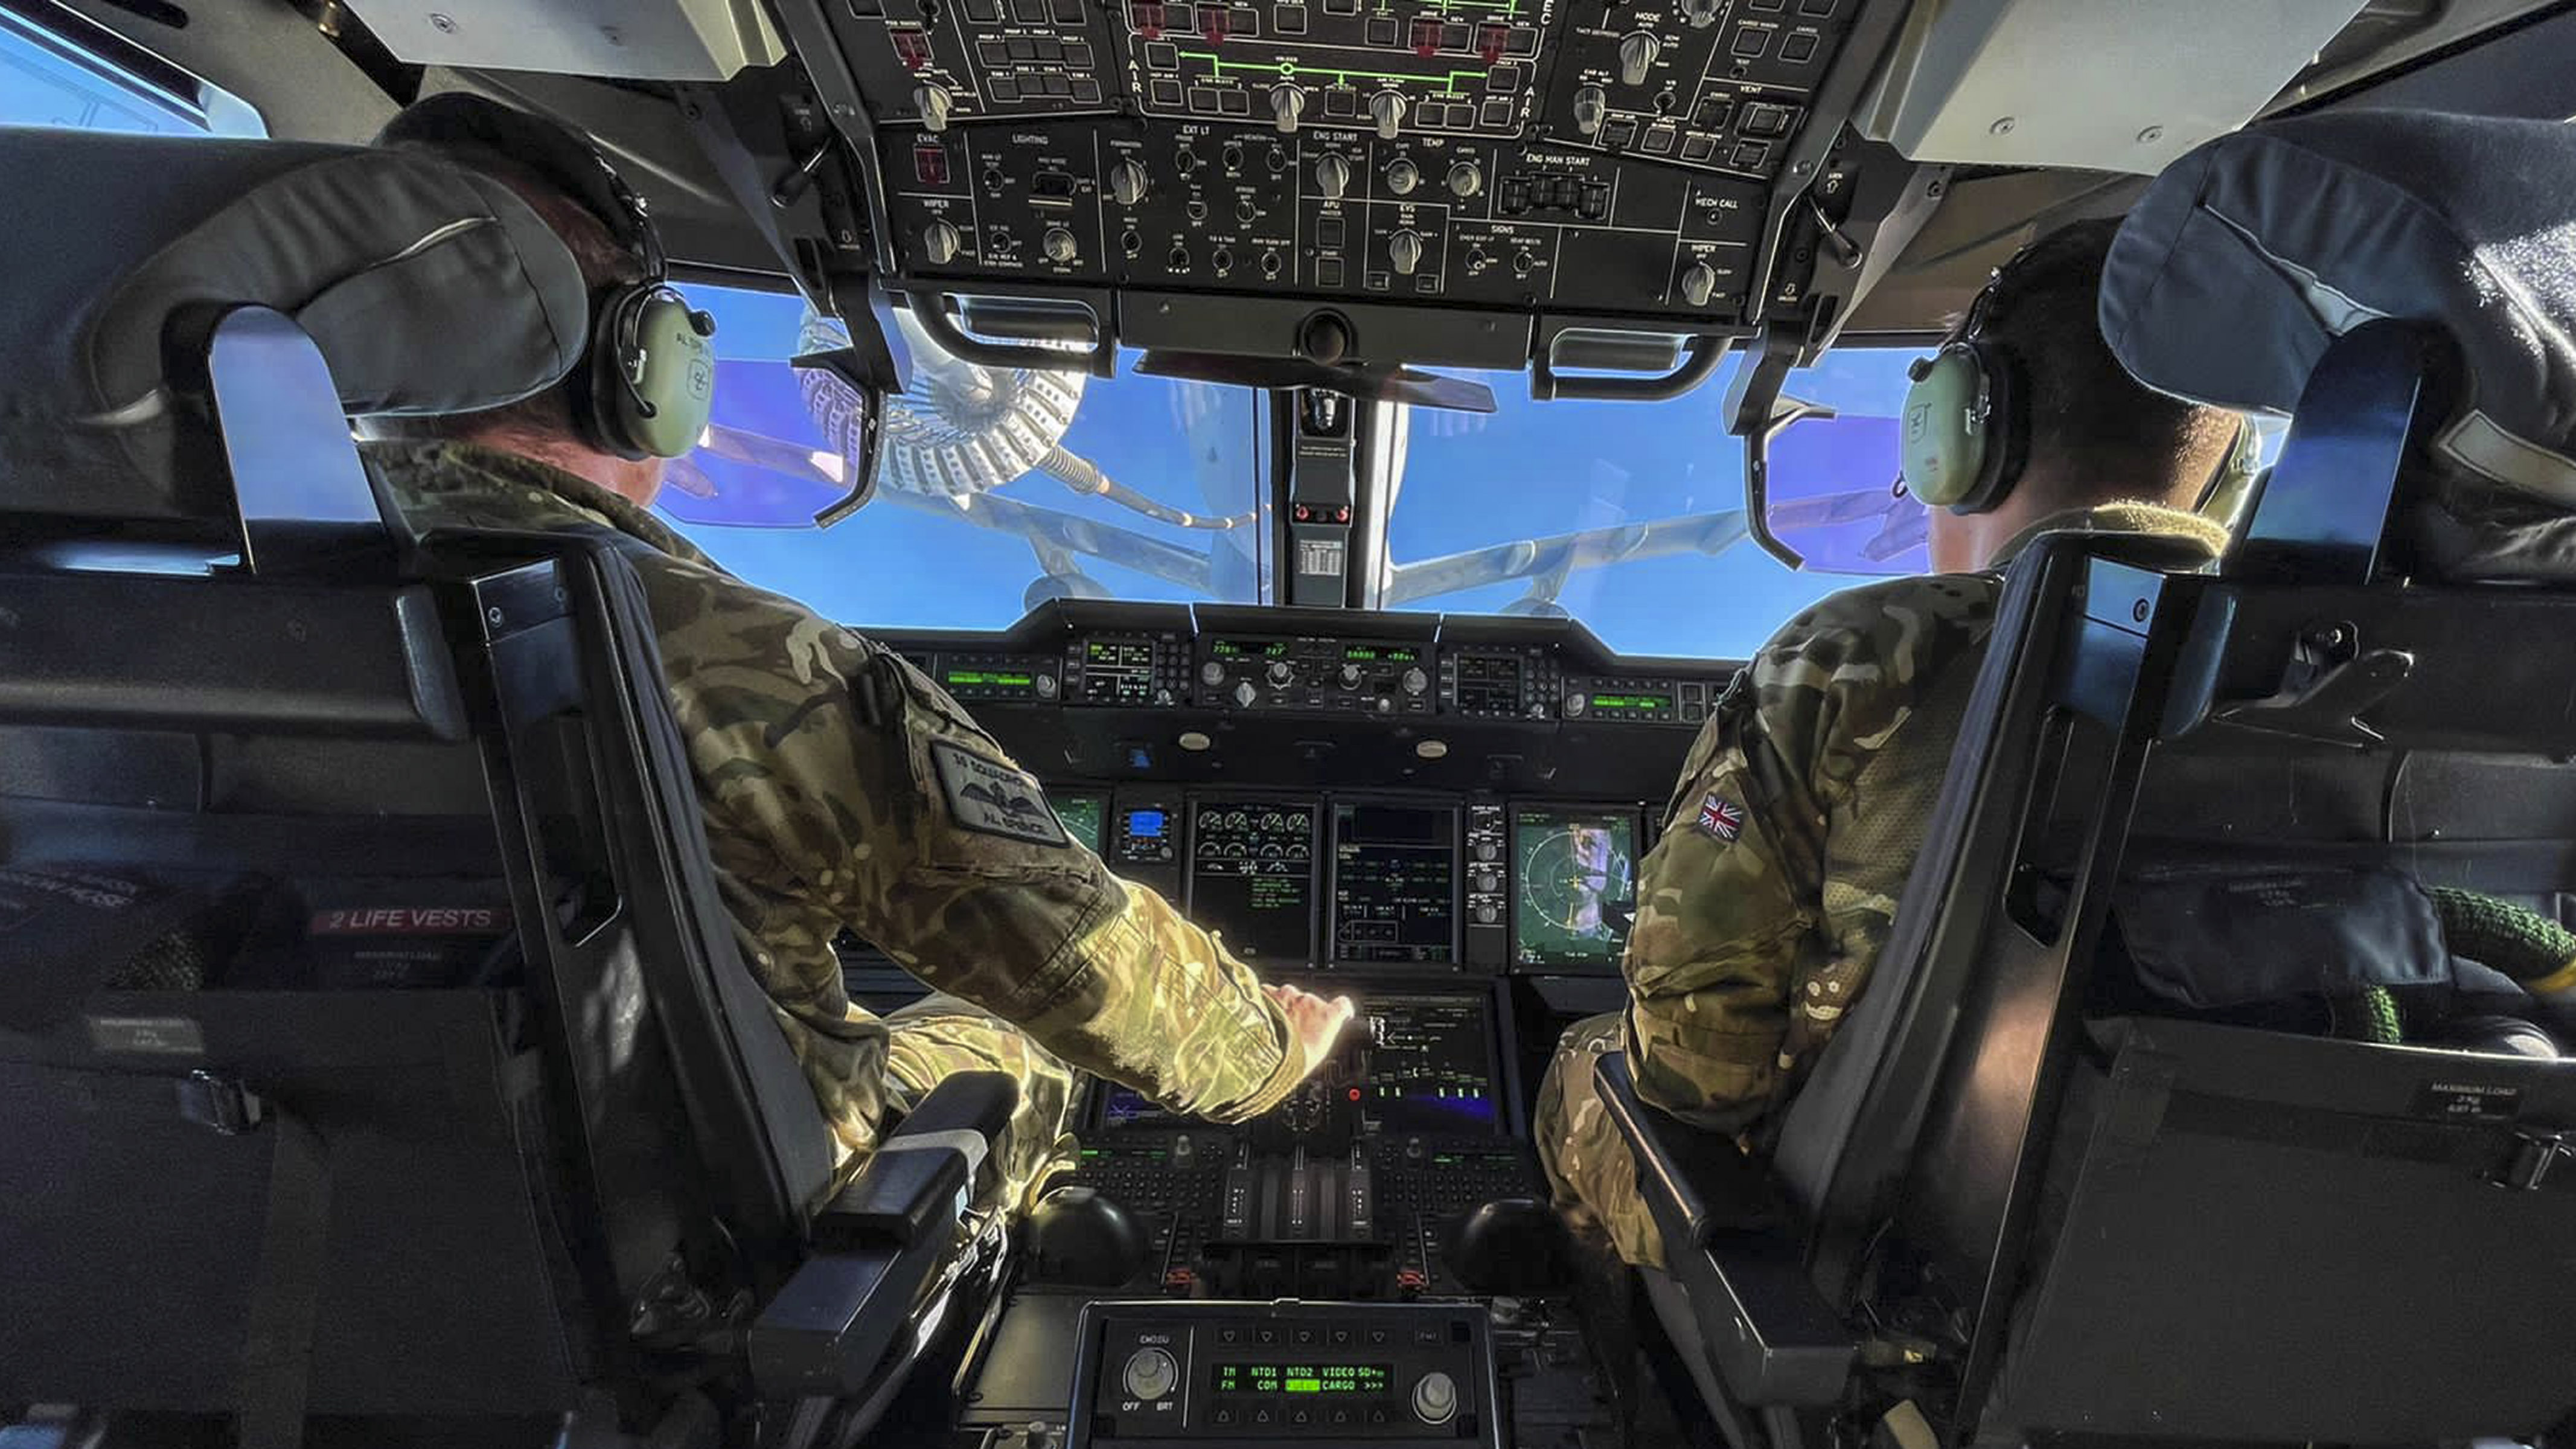 Image shows RAF pilots in transport aircraft cockpit.